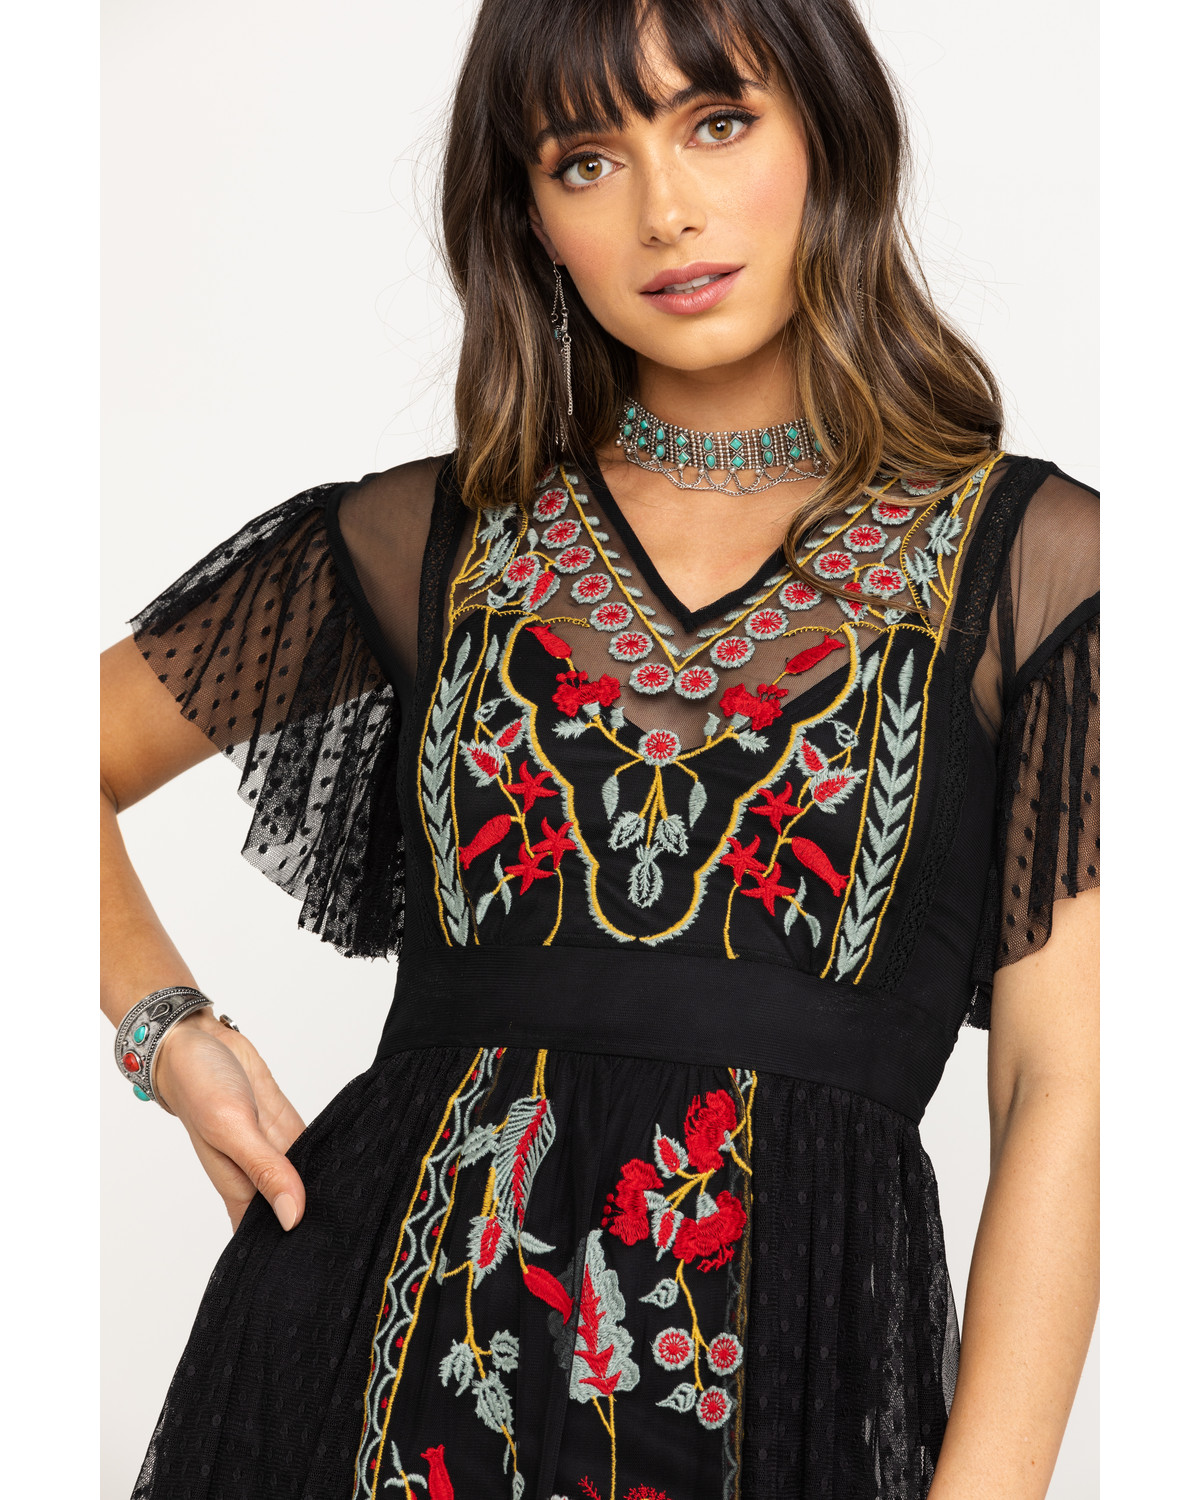 Band of Gypsies Women's Black Puebla Embroidered Dress | Sheplers